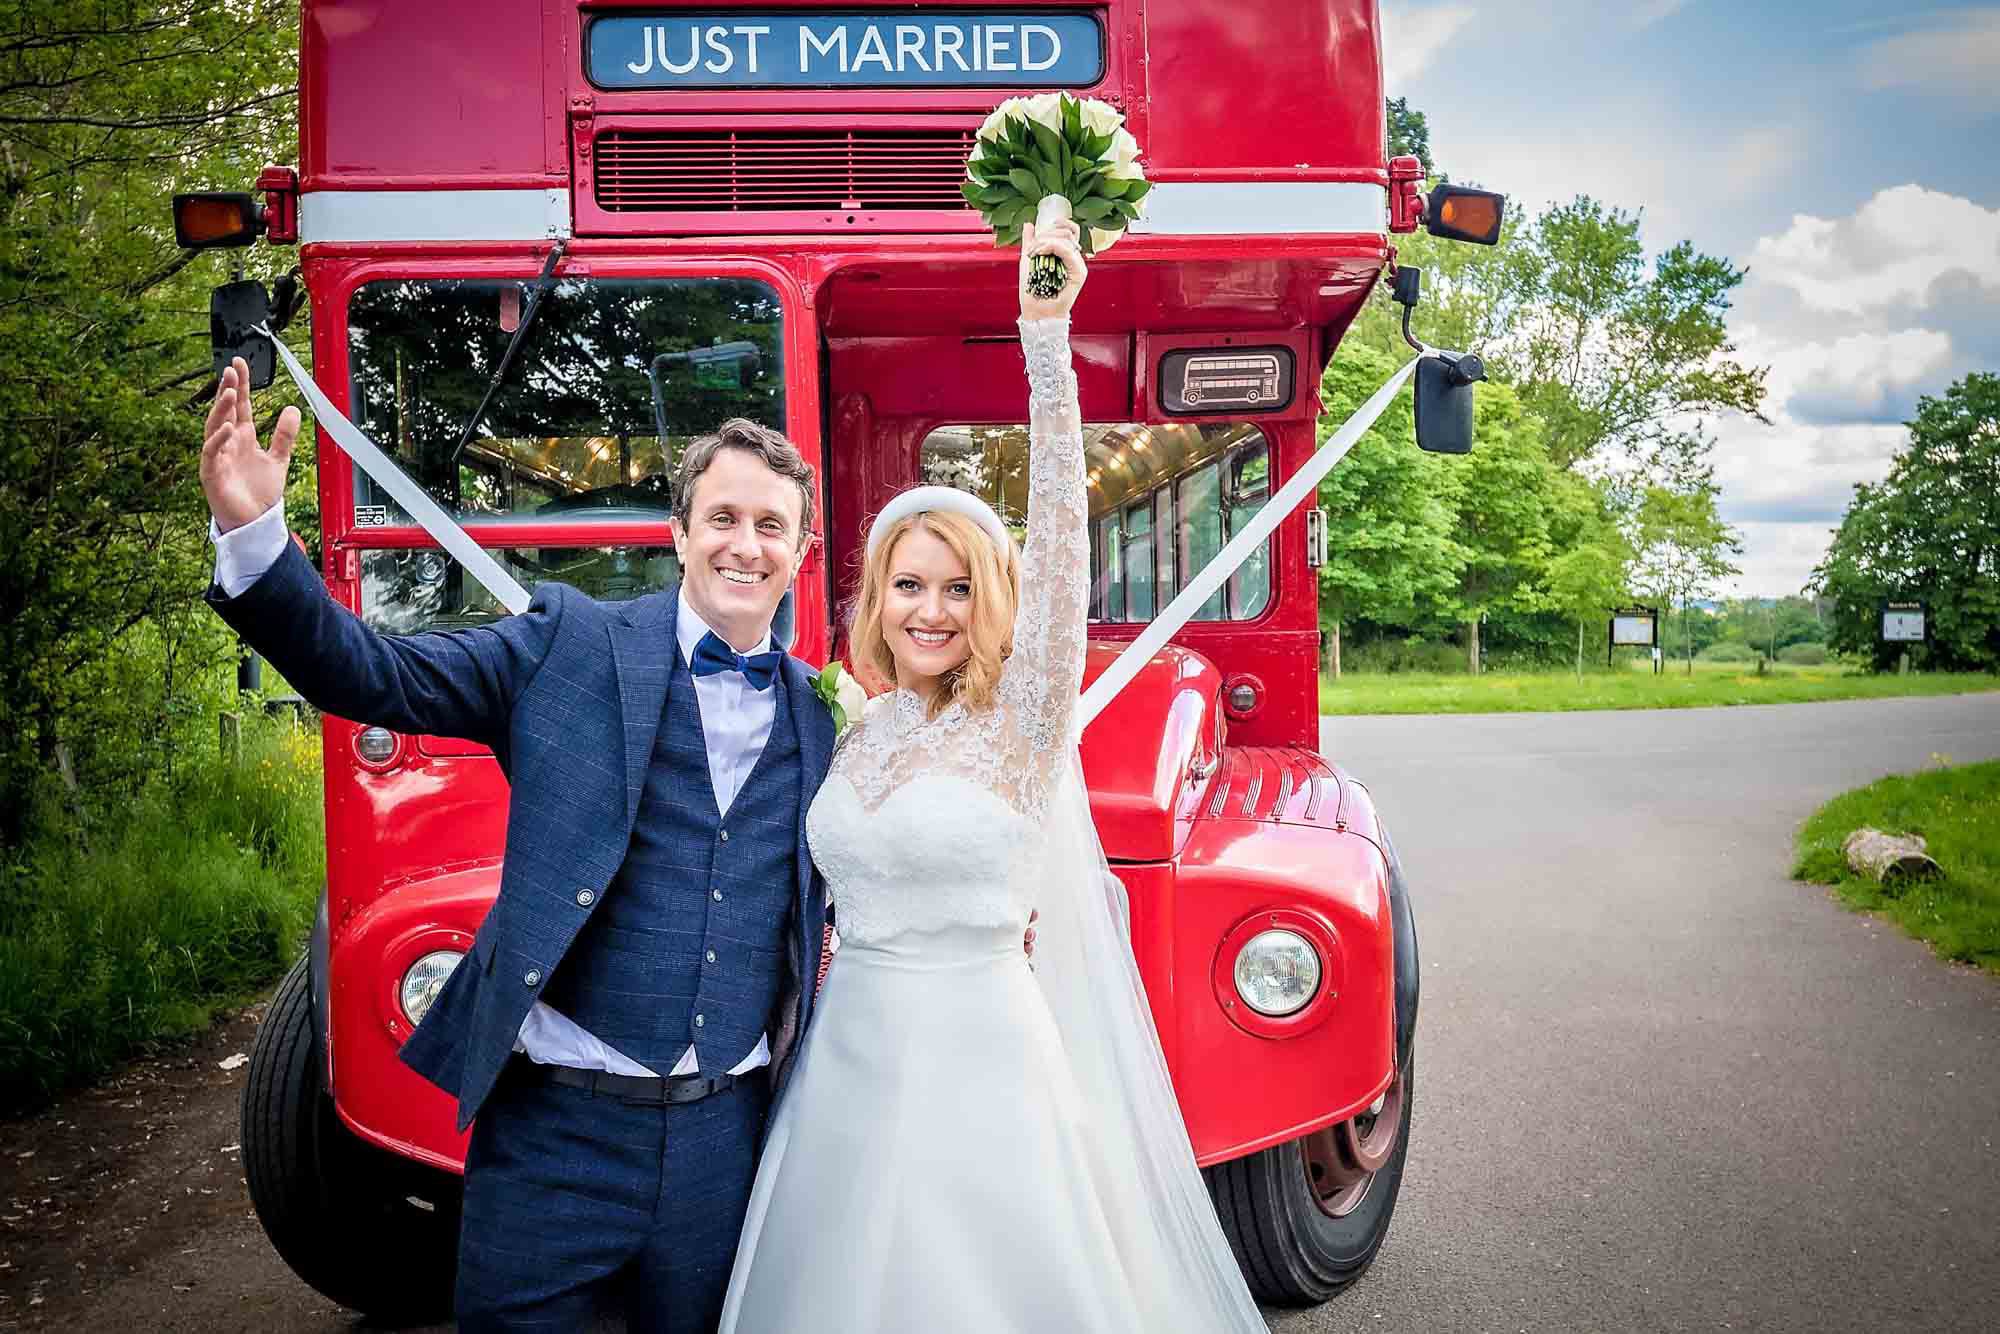 The bride and groom hold their arms in the air, posing in front of a routemaster bus